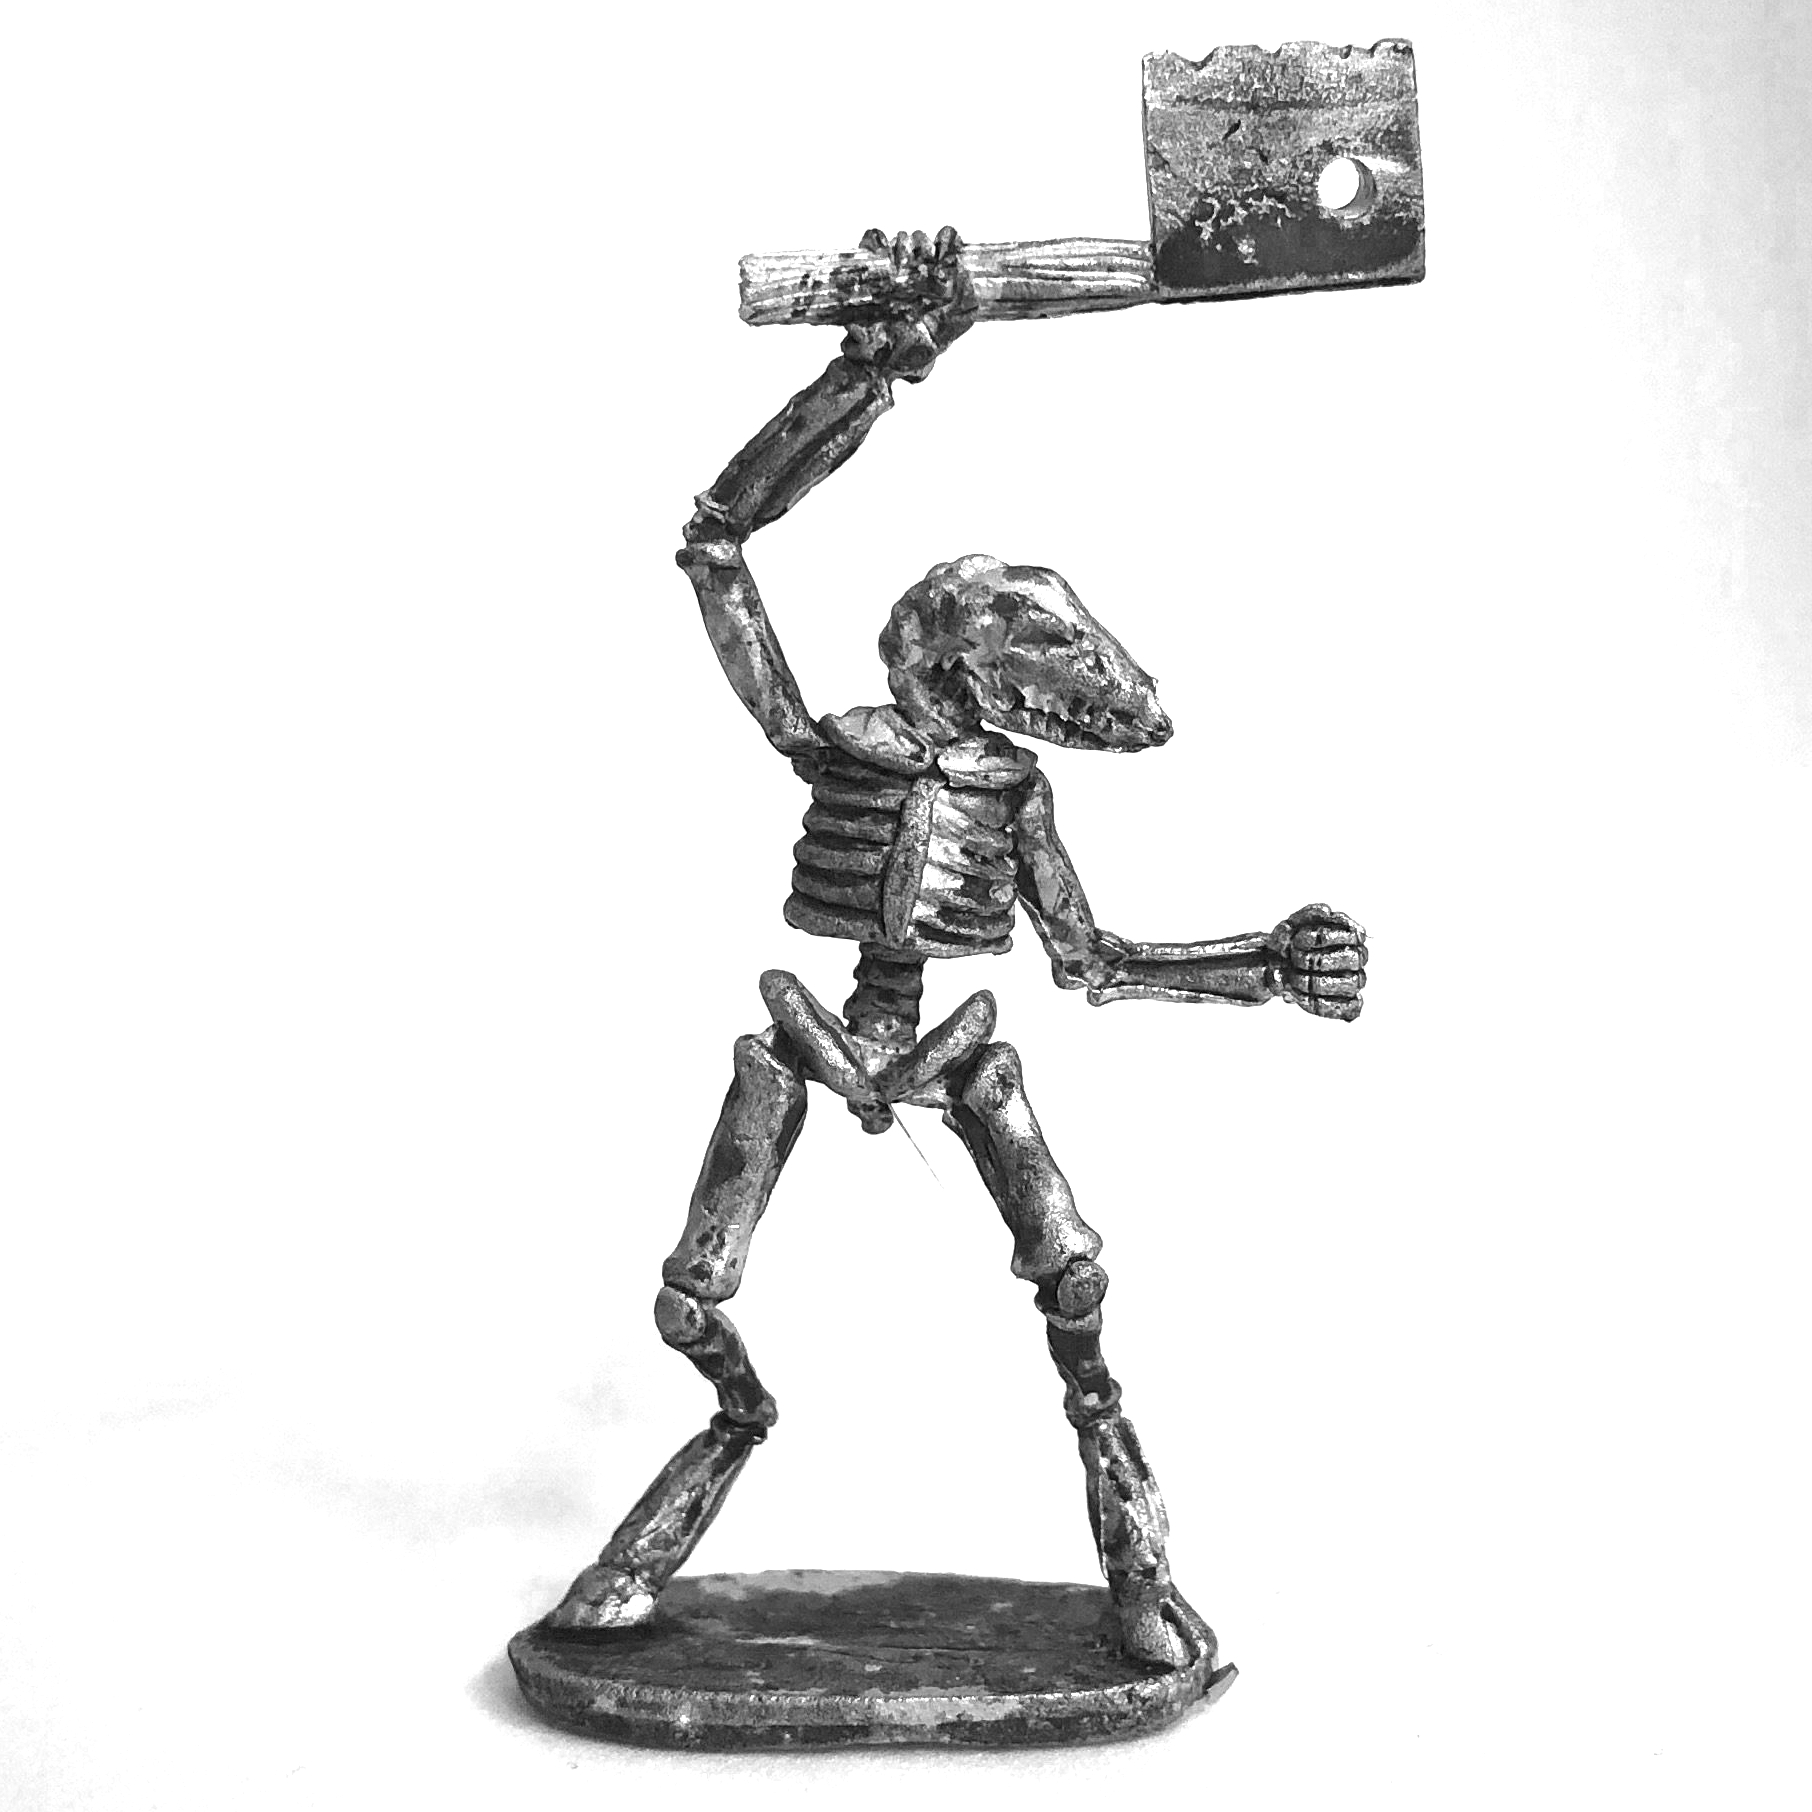 Goat Headed Skeleton with Cleaver